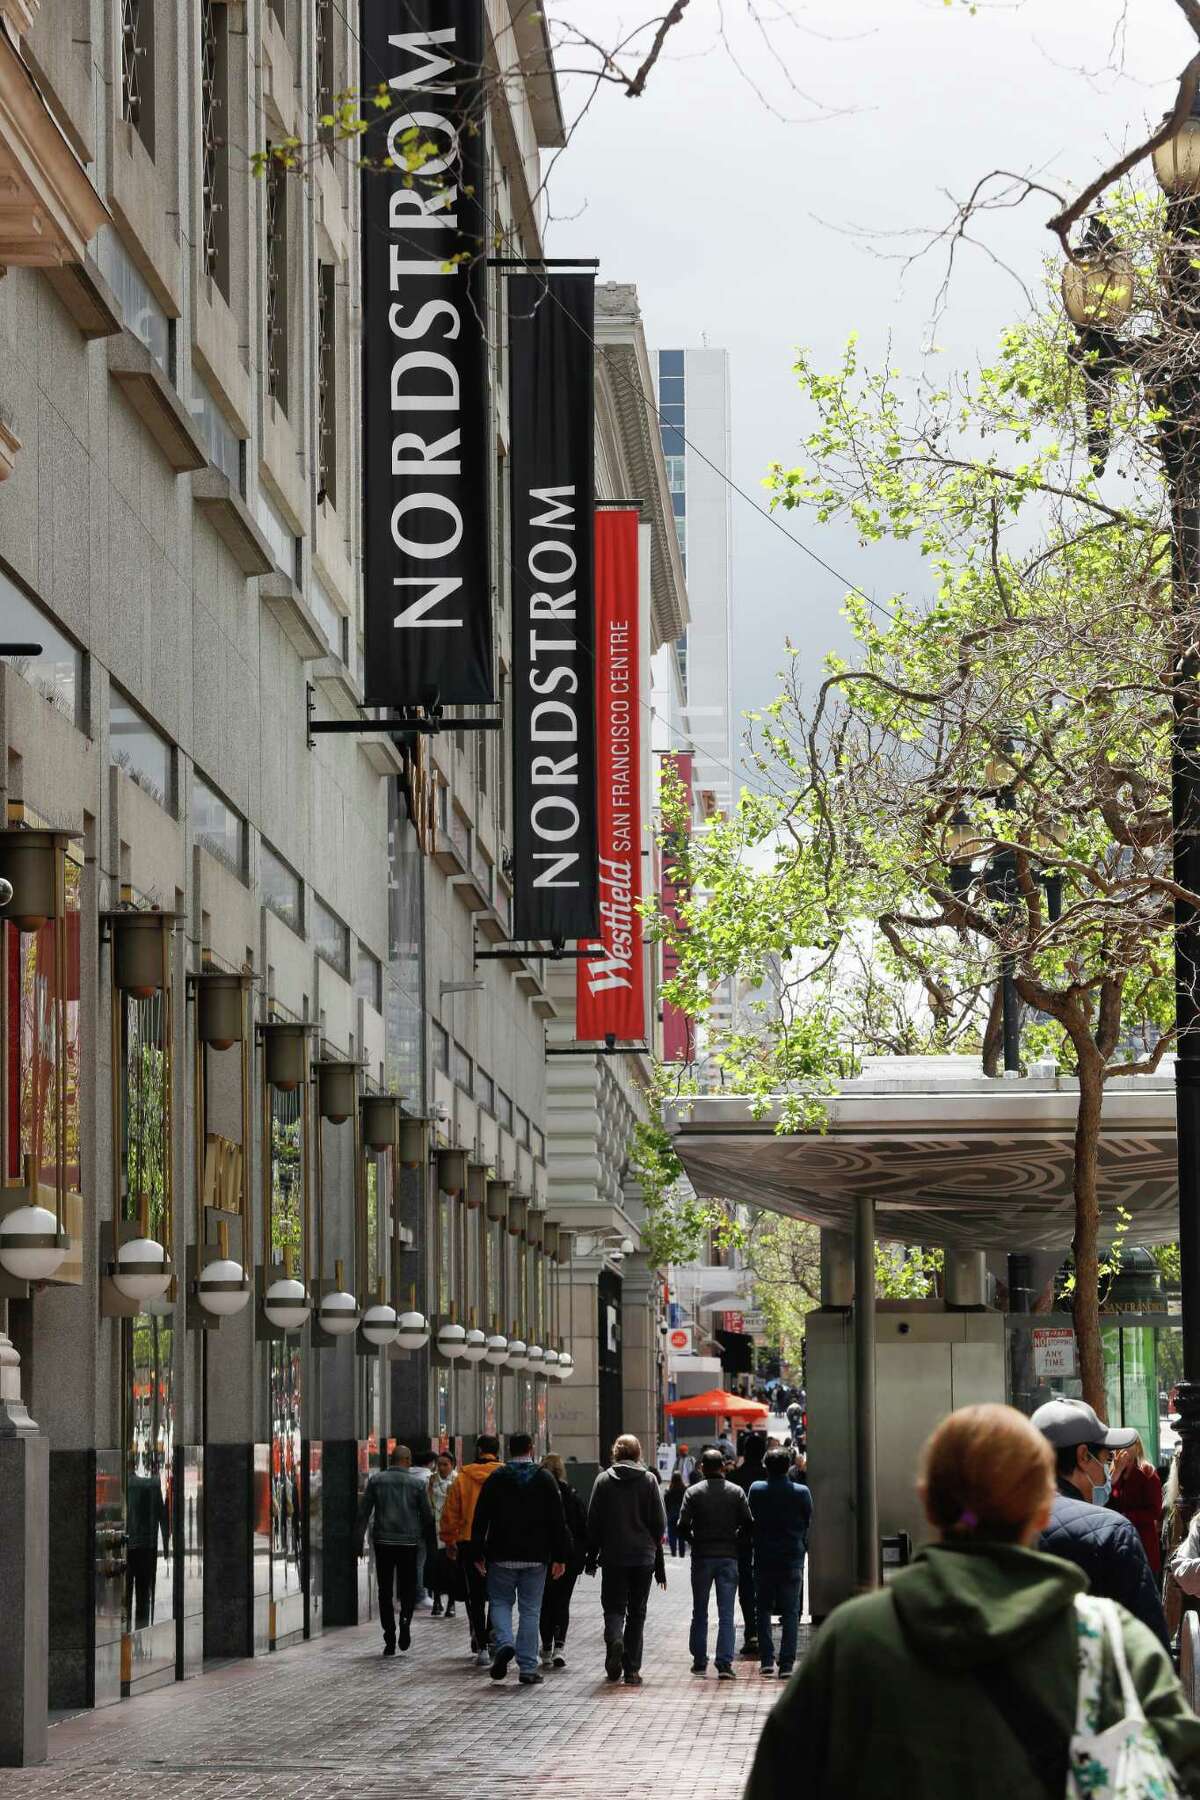 Is Nordstrom's departure from SF positive or negative?